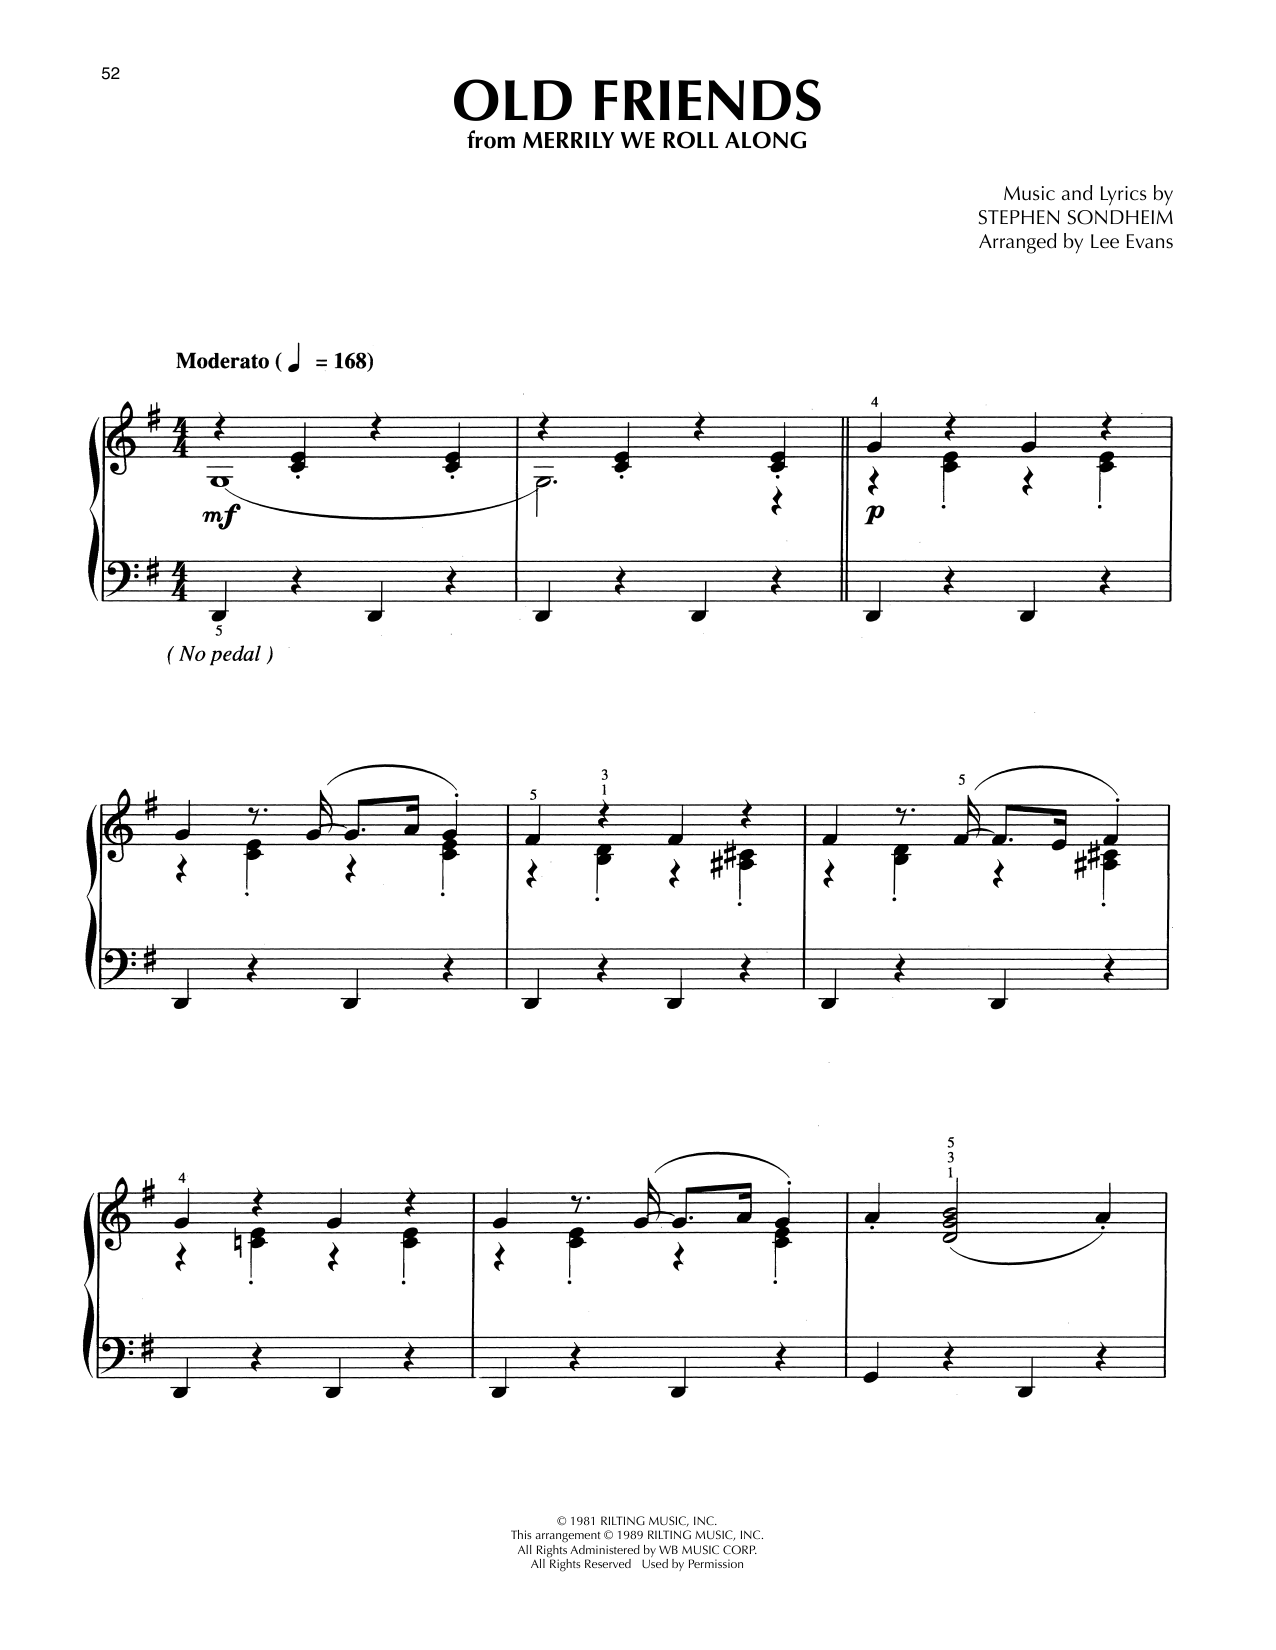 Download Stephen Sondheim Old Friends (from Merrily We Roll Along Sheet Music